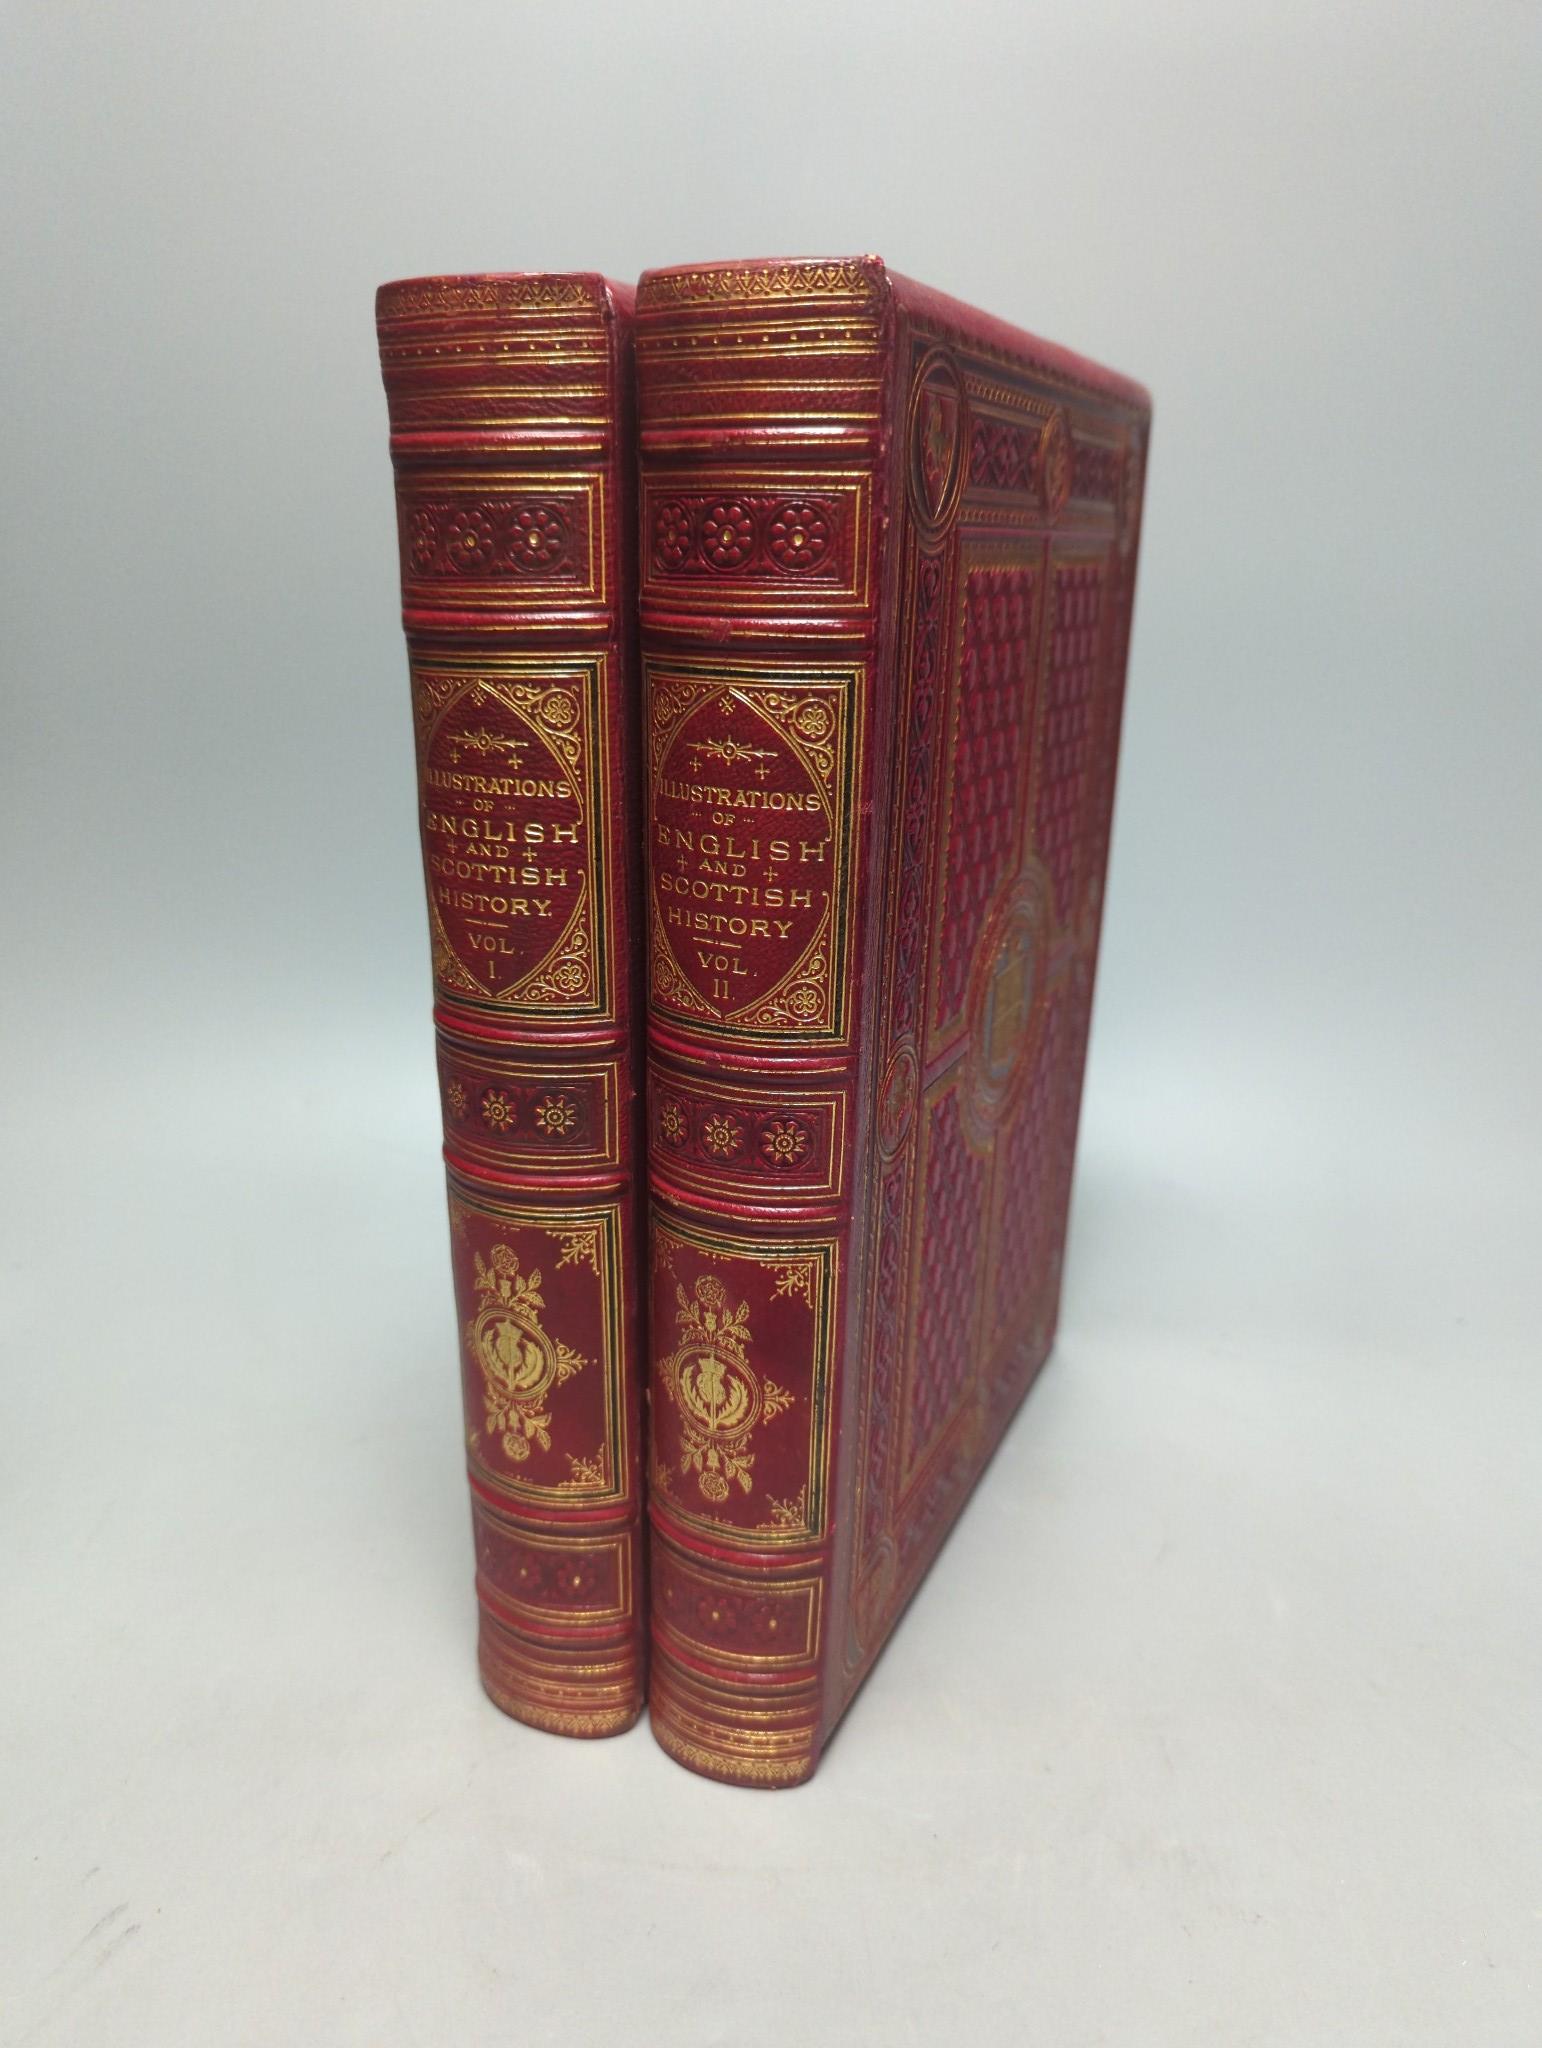 Archer, Thomas - Pictures and Royal Portraits Illustrative of English and Scottish History.... with descriptive historical sketches. 2 vols. Many engraved plates; publisher's elaborately gilt and blind decorated red moro